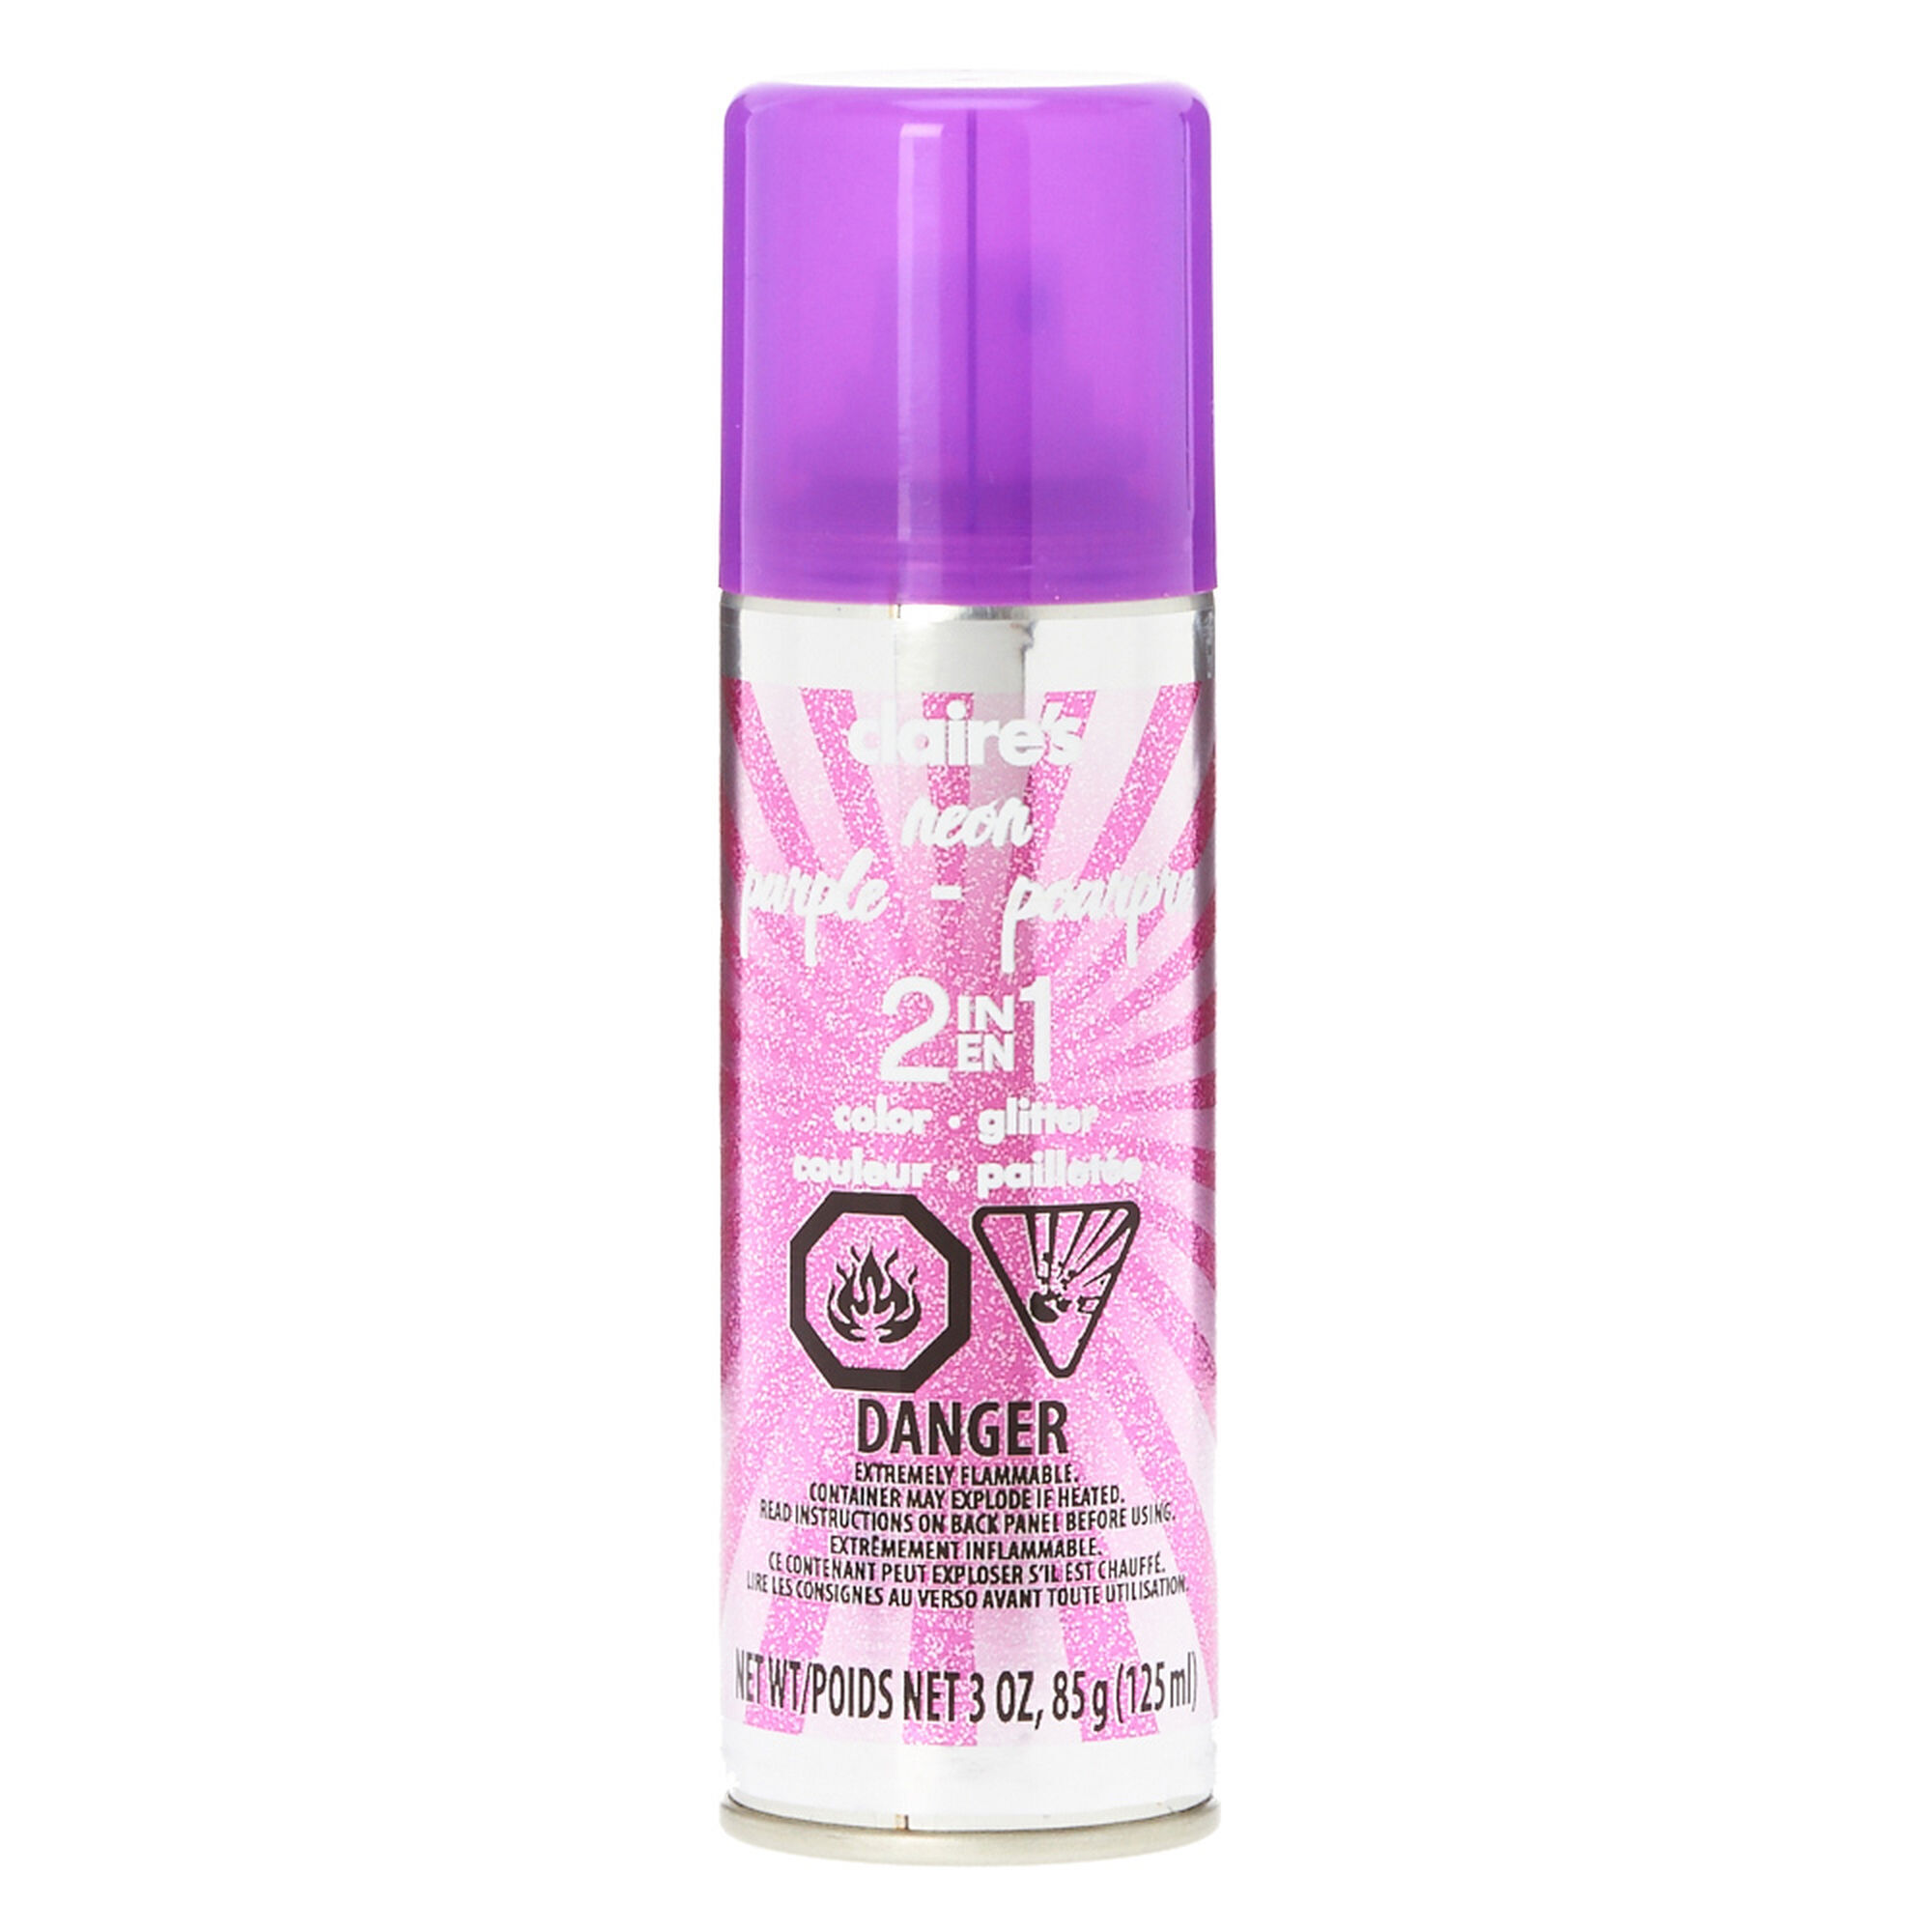 View Claires Neon Glitter 2 In 1 Temporary Hair Colour Spray Purple information